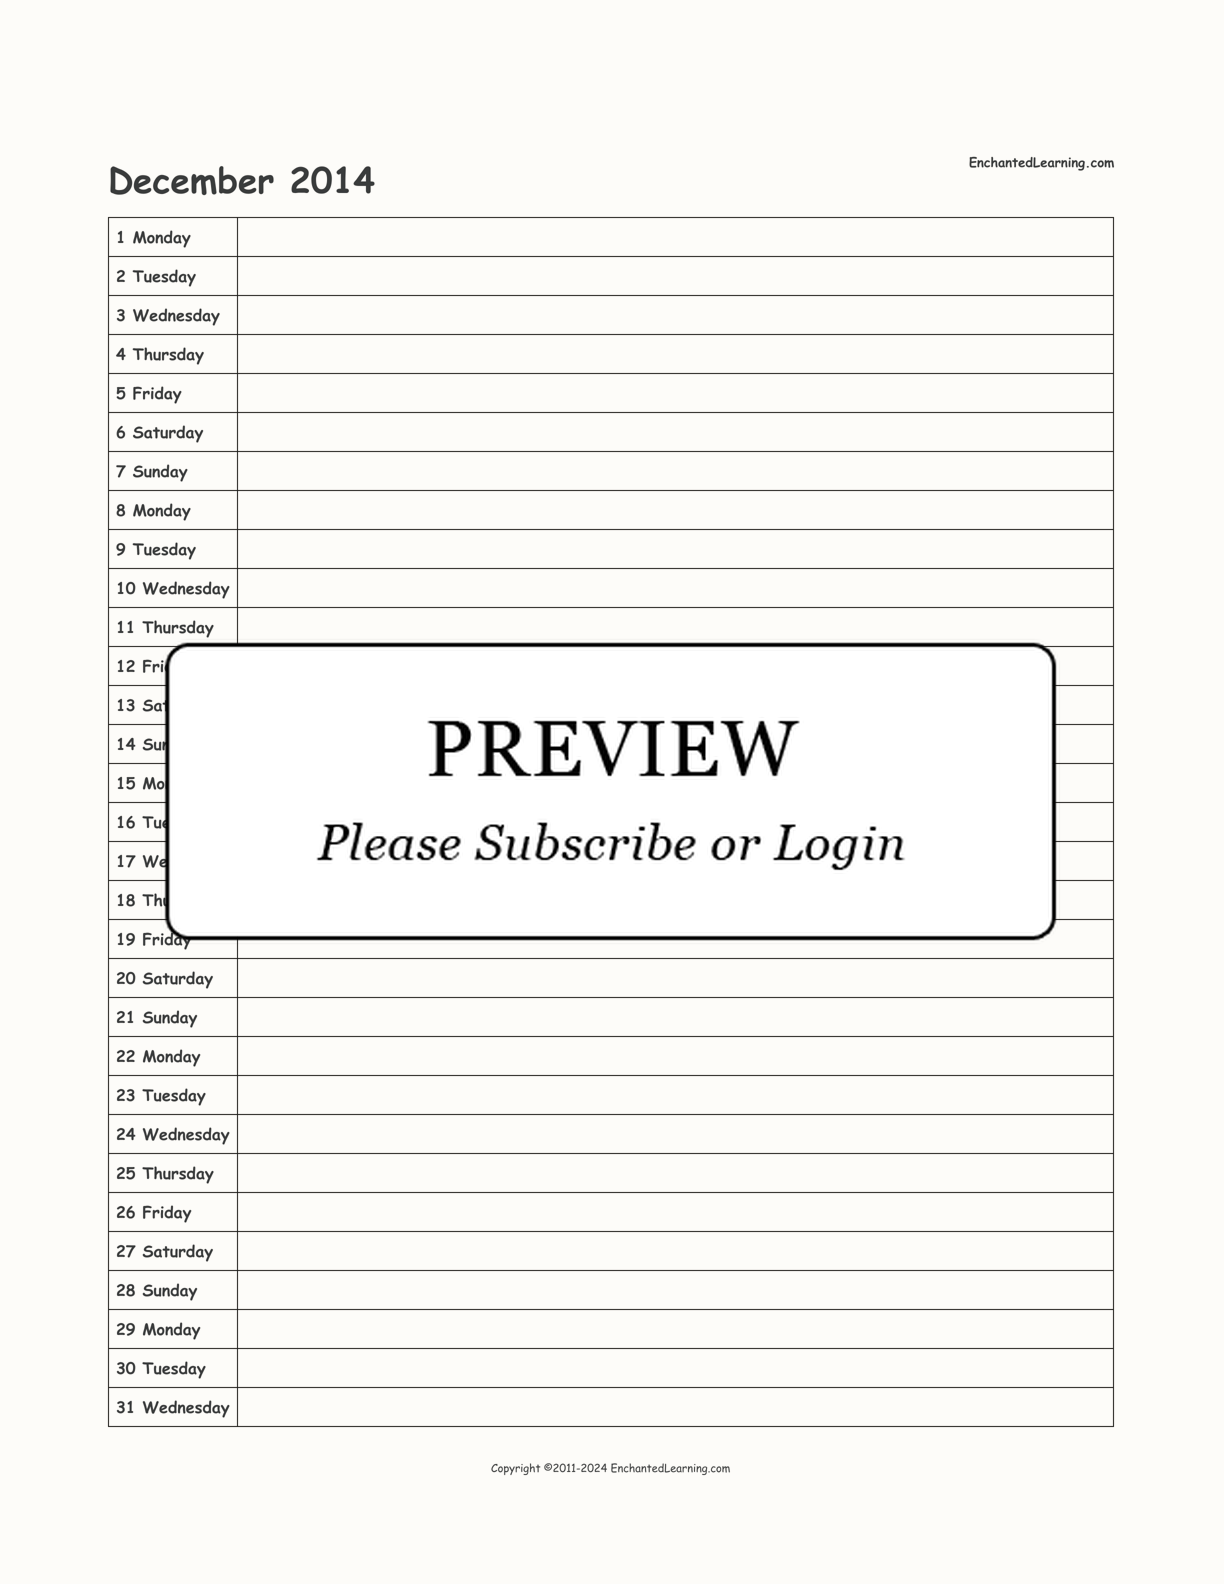 2014 Scheduling Calendar interactive printout page 12